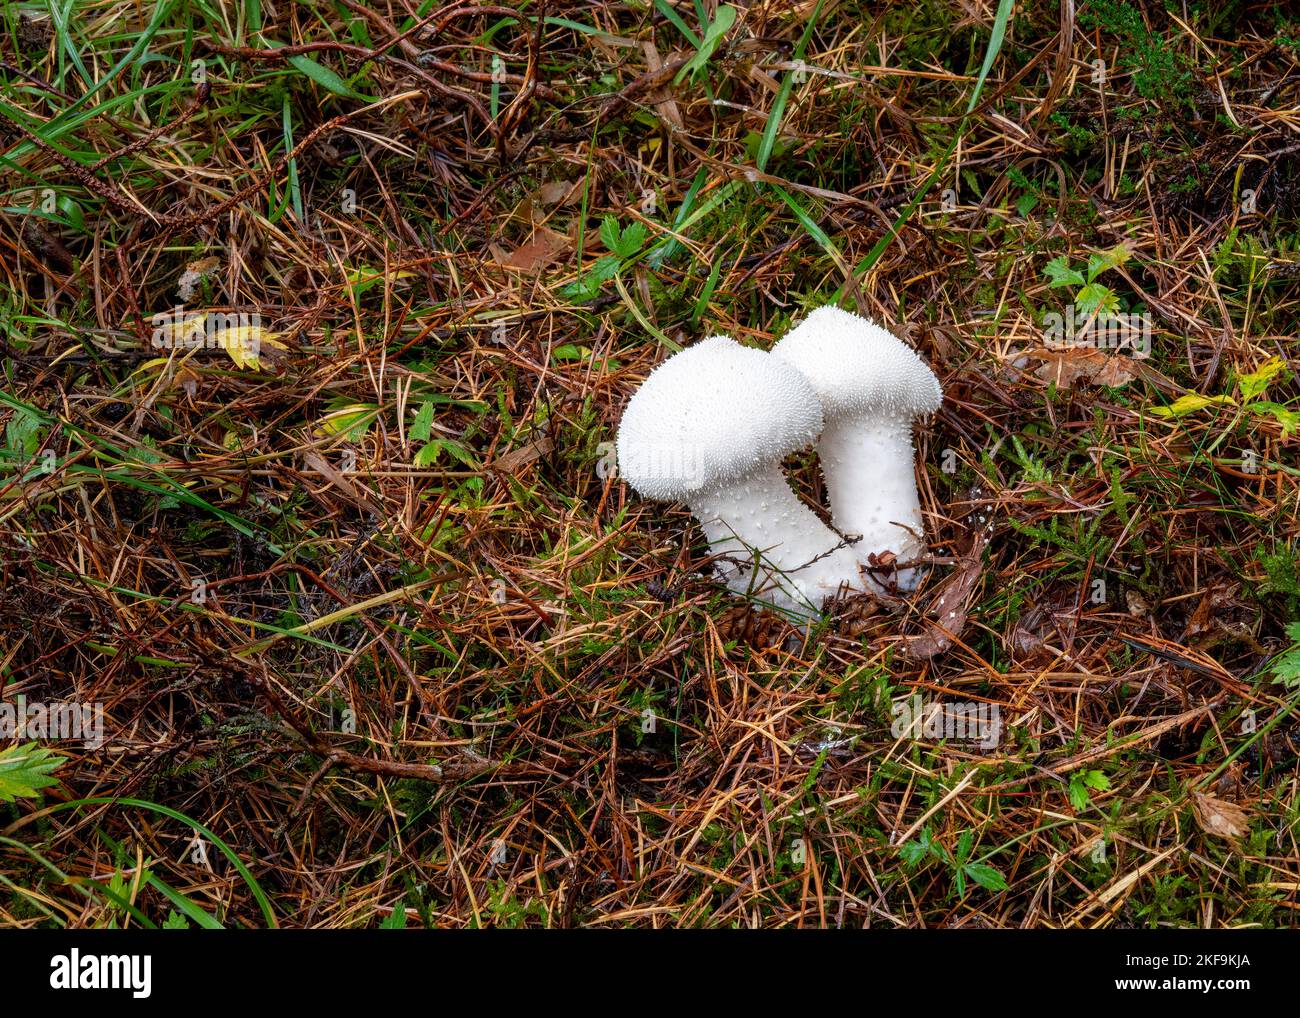 Two young puffball fungi growing amongst grass and pine-needles in Beacon Wood, Penrith, Cumbria, UK Stock Photo